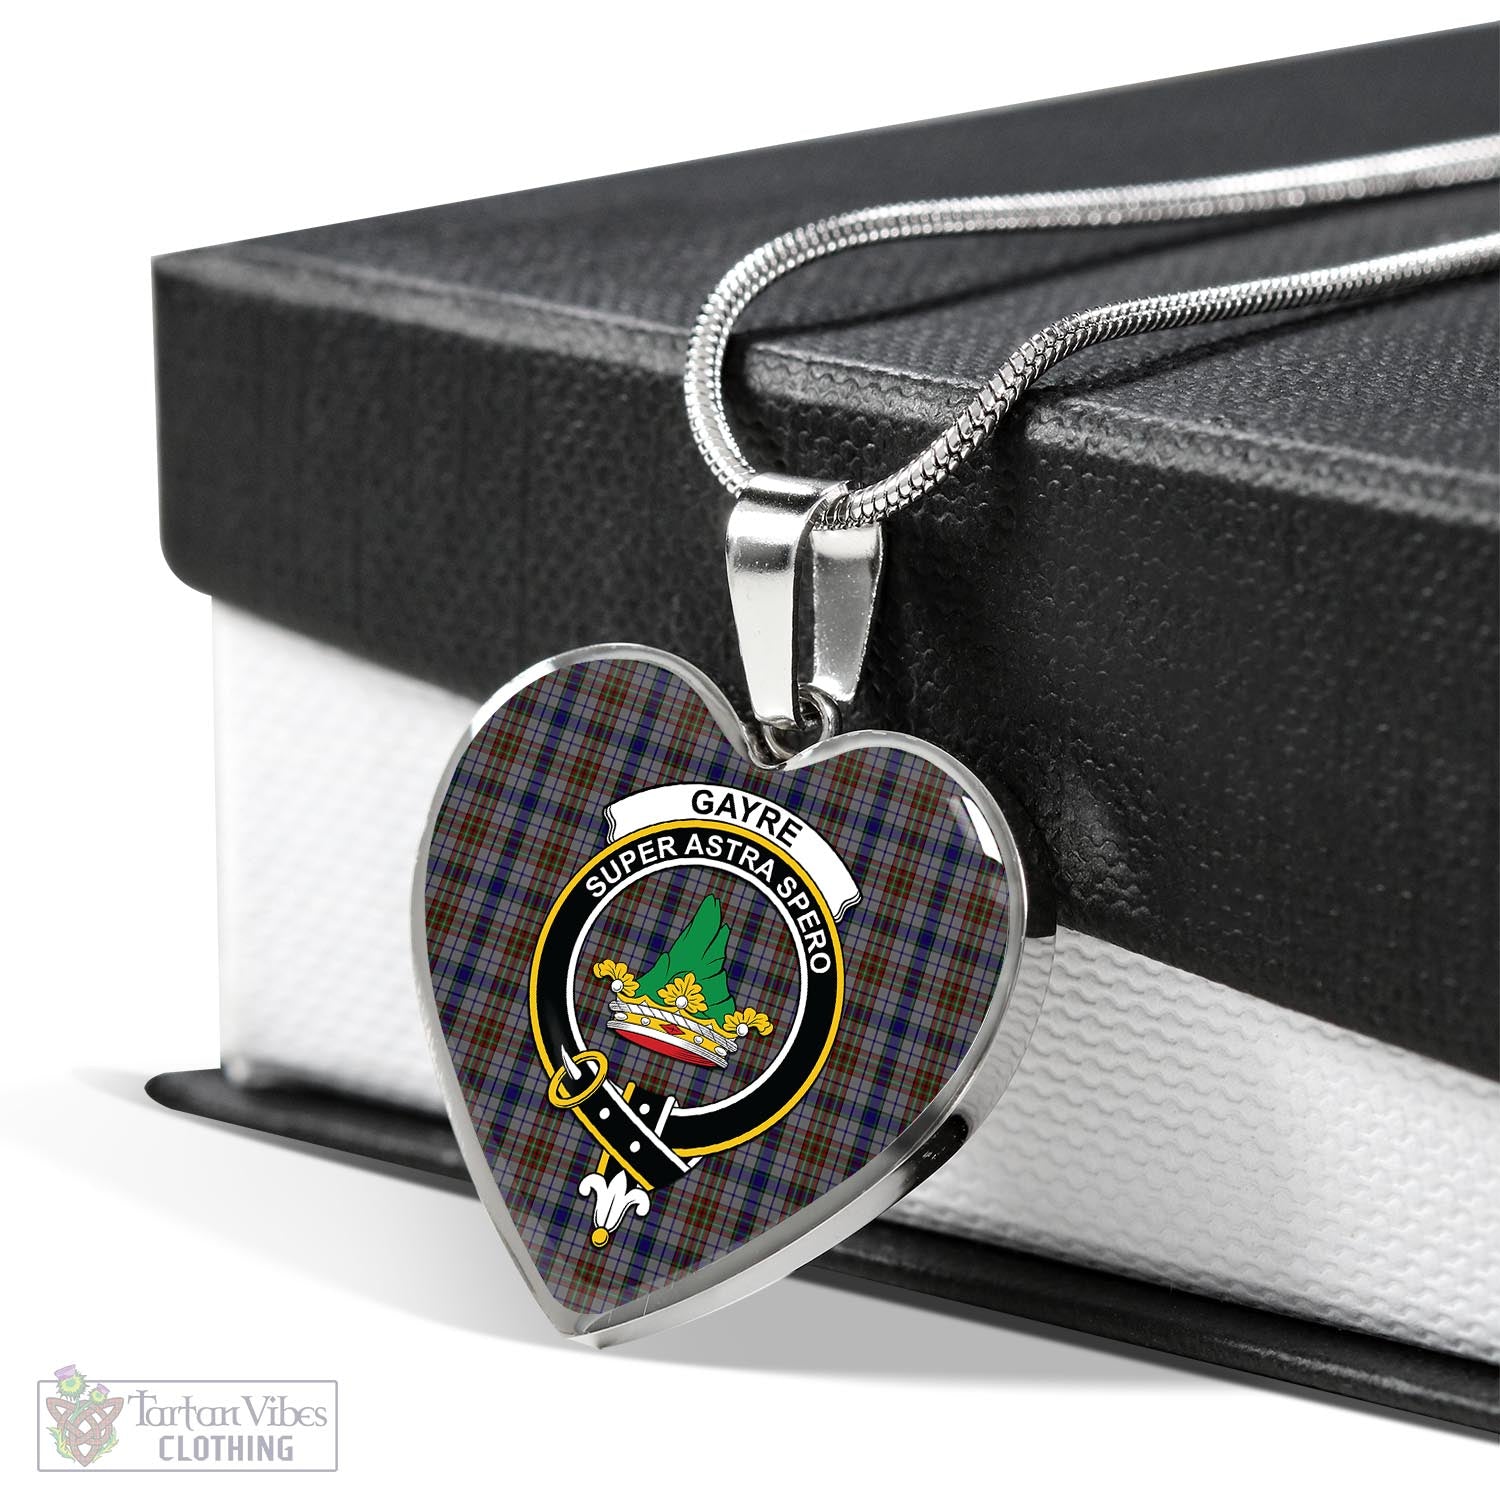 Tartan Vibes Clothing Gayre Hunting Tartan Heart Necklace with Family Crest